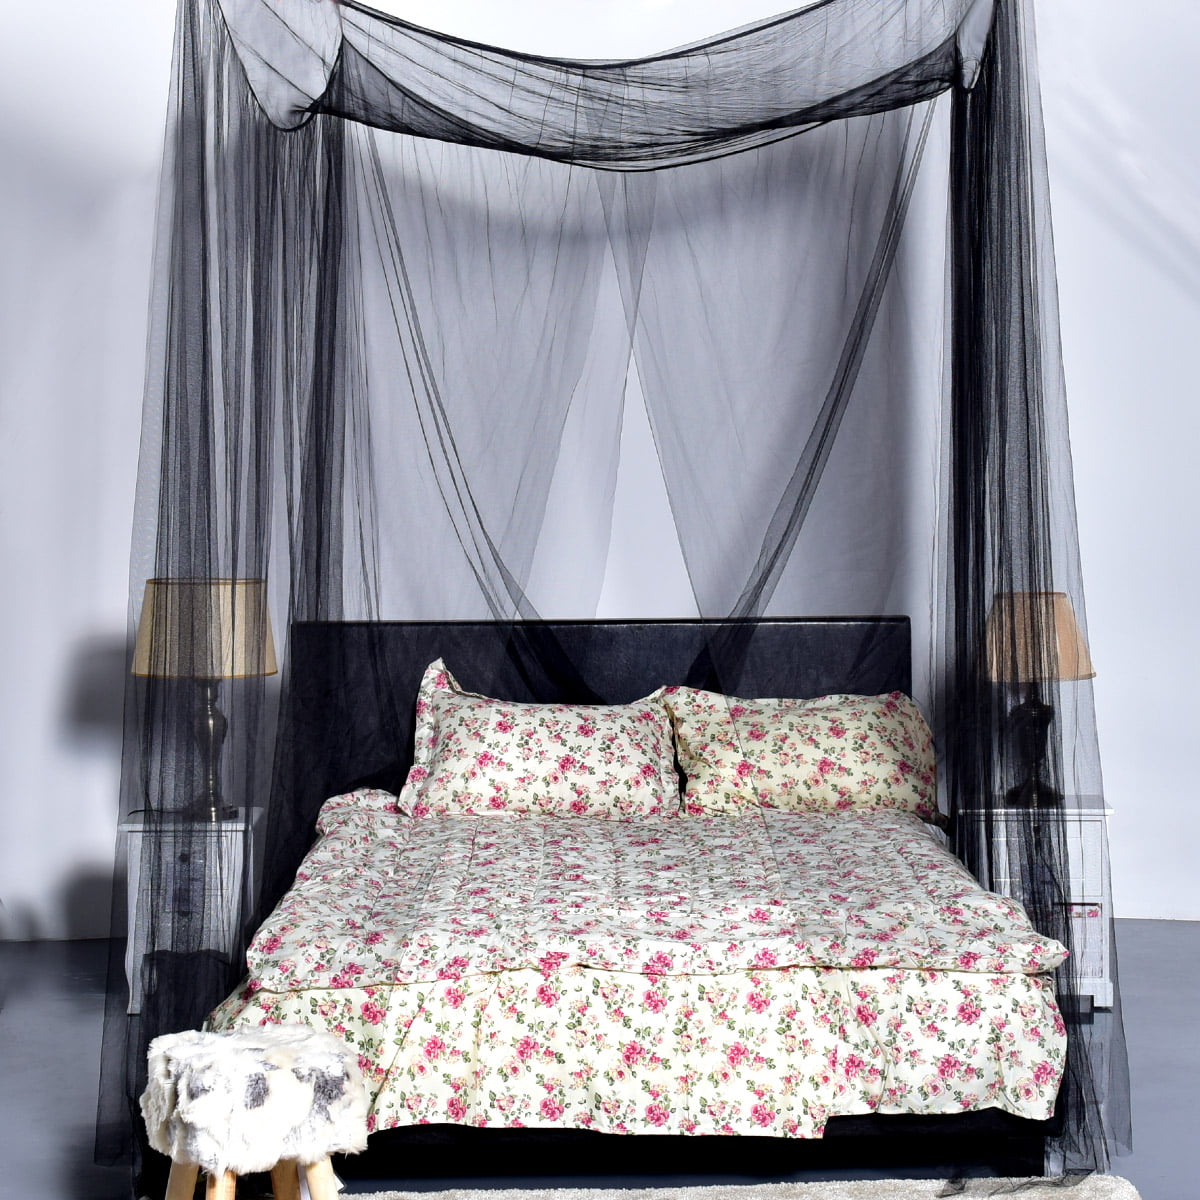 Details about   Black 4 Corner Post Bed Canopy Mosquito Netting Twin Full Queen King Size 